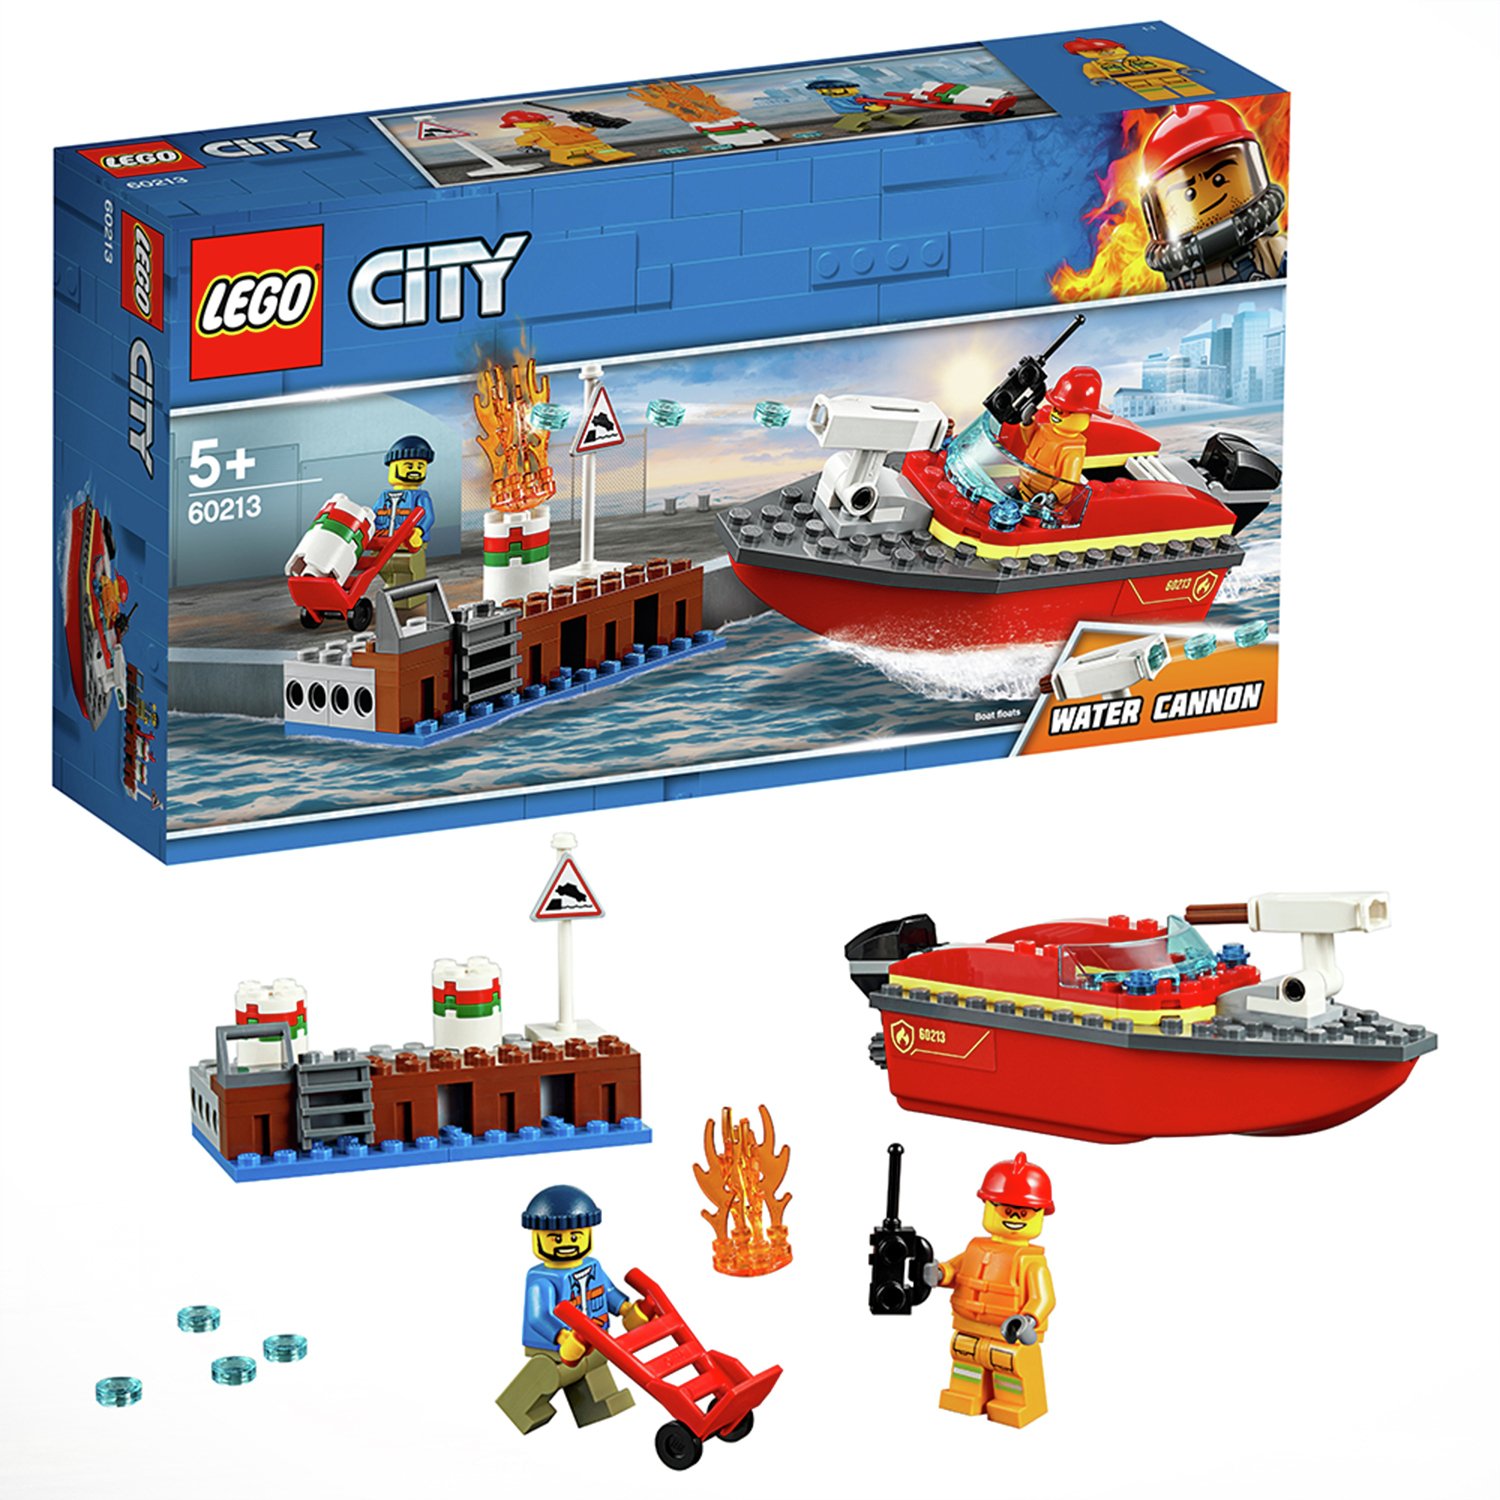 LEGO City Fire Dock Side Fire Toy Boat Playset review